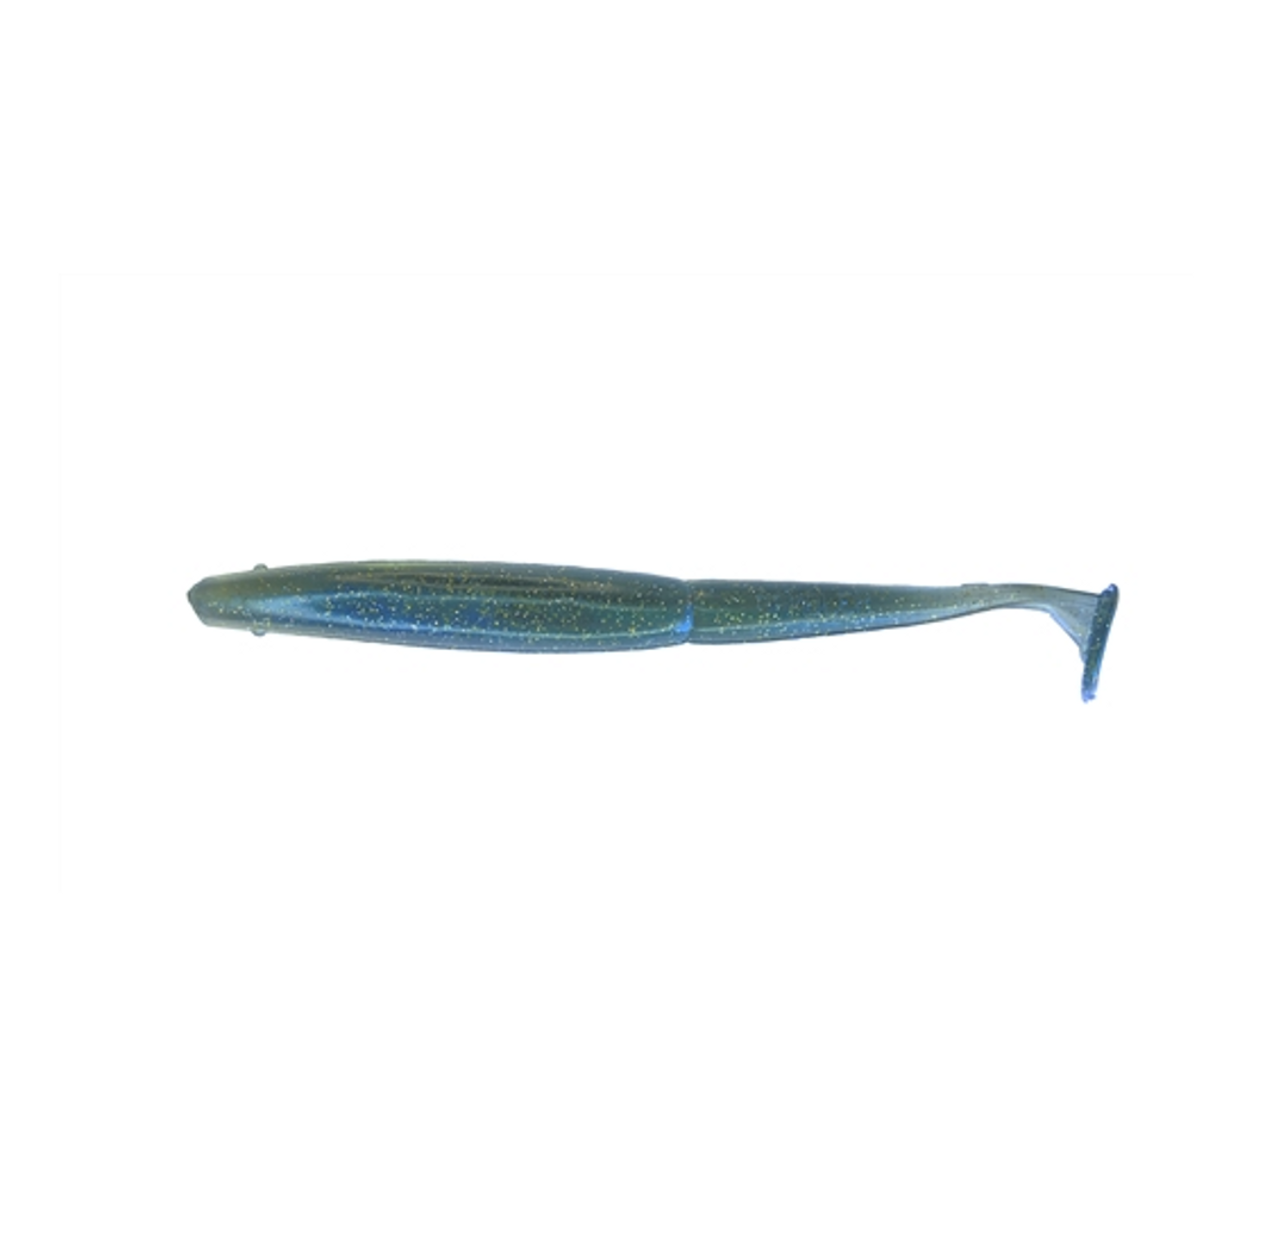 https://cdn11.bigcommerce.com/s-h9hha4a/images/stencil/1280x1280/products/7189/26040/Gambler_Lures_Slim_EZ_Ghost_Shad__54057.1658228860.png?c=2